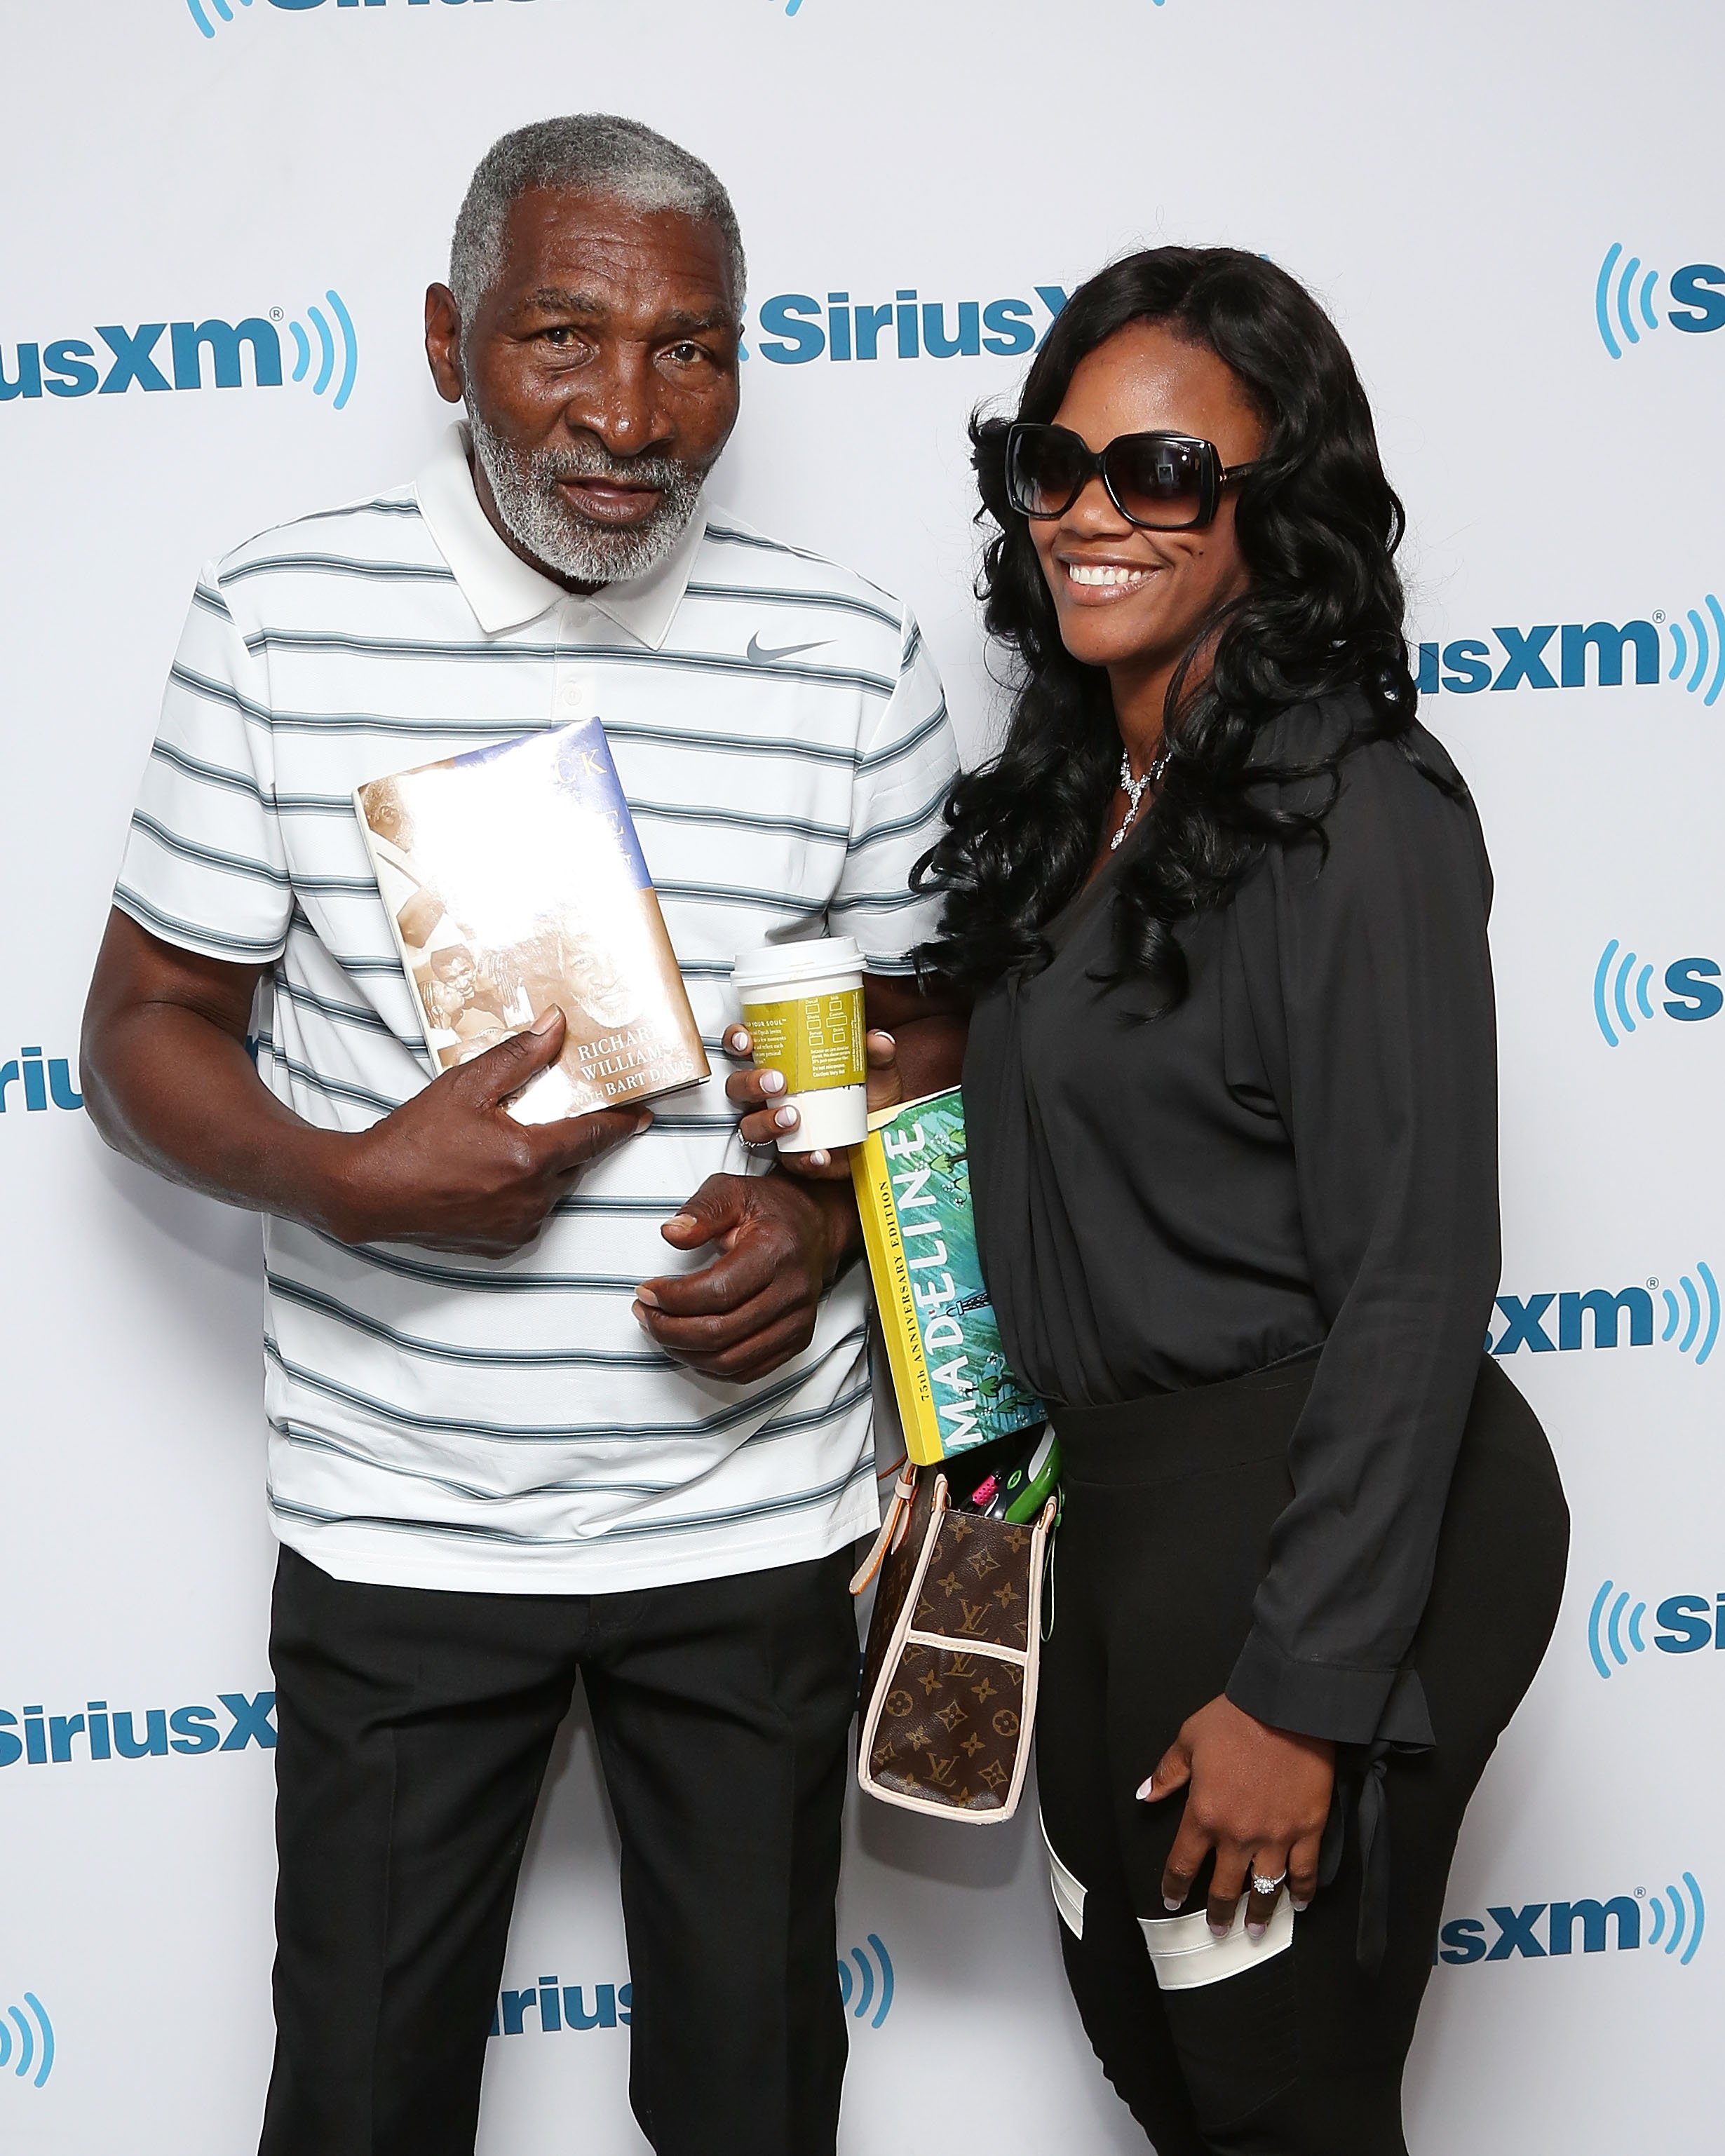 Richard Williams and Lakeisha Graham visit the SiriusXM Studios on May 6, 2014 in New York City. | Photo: Getty Images